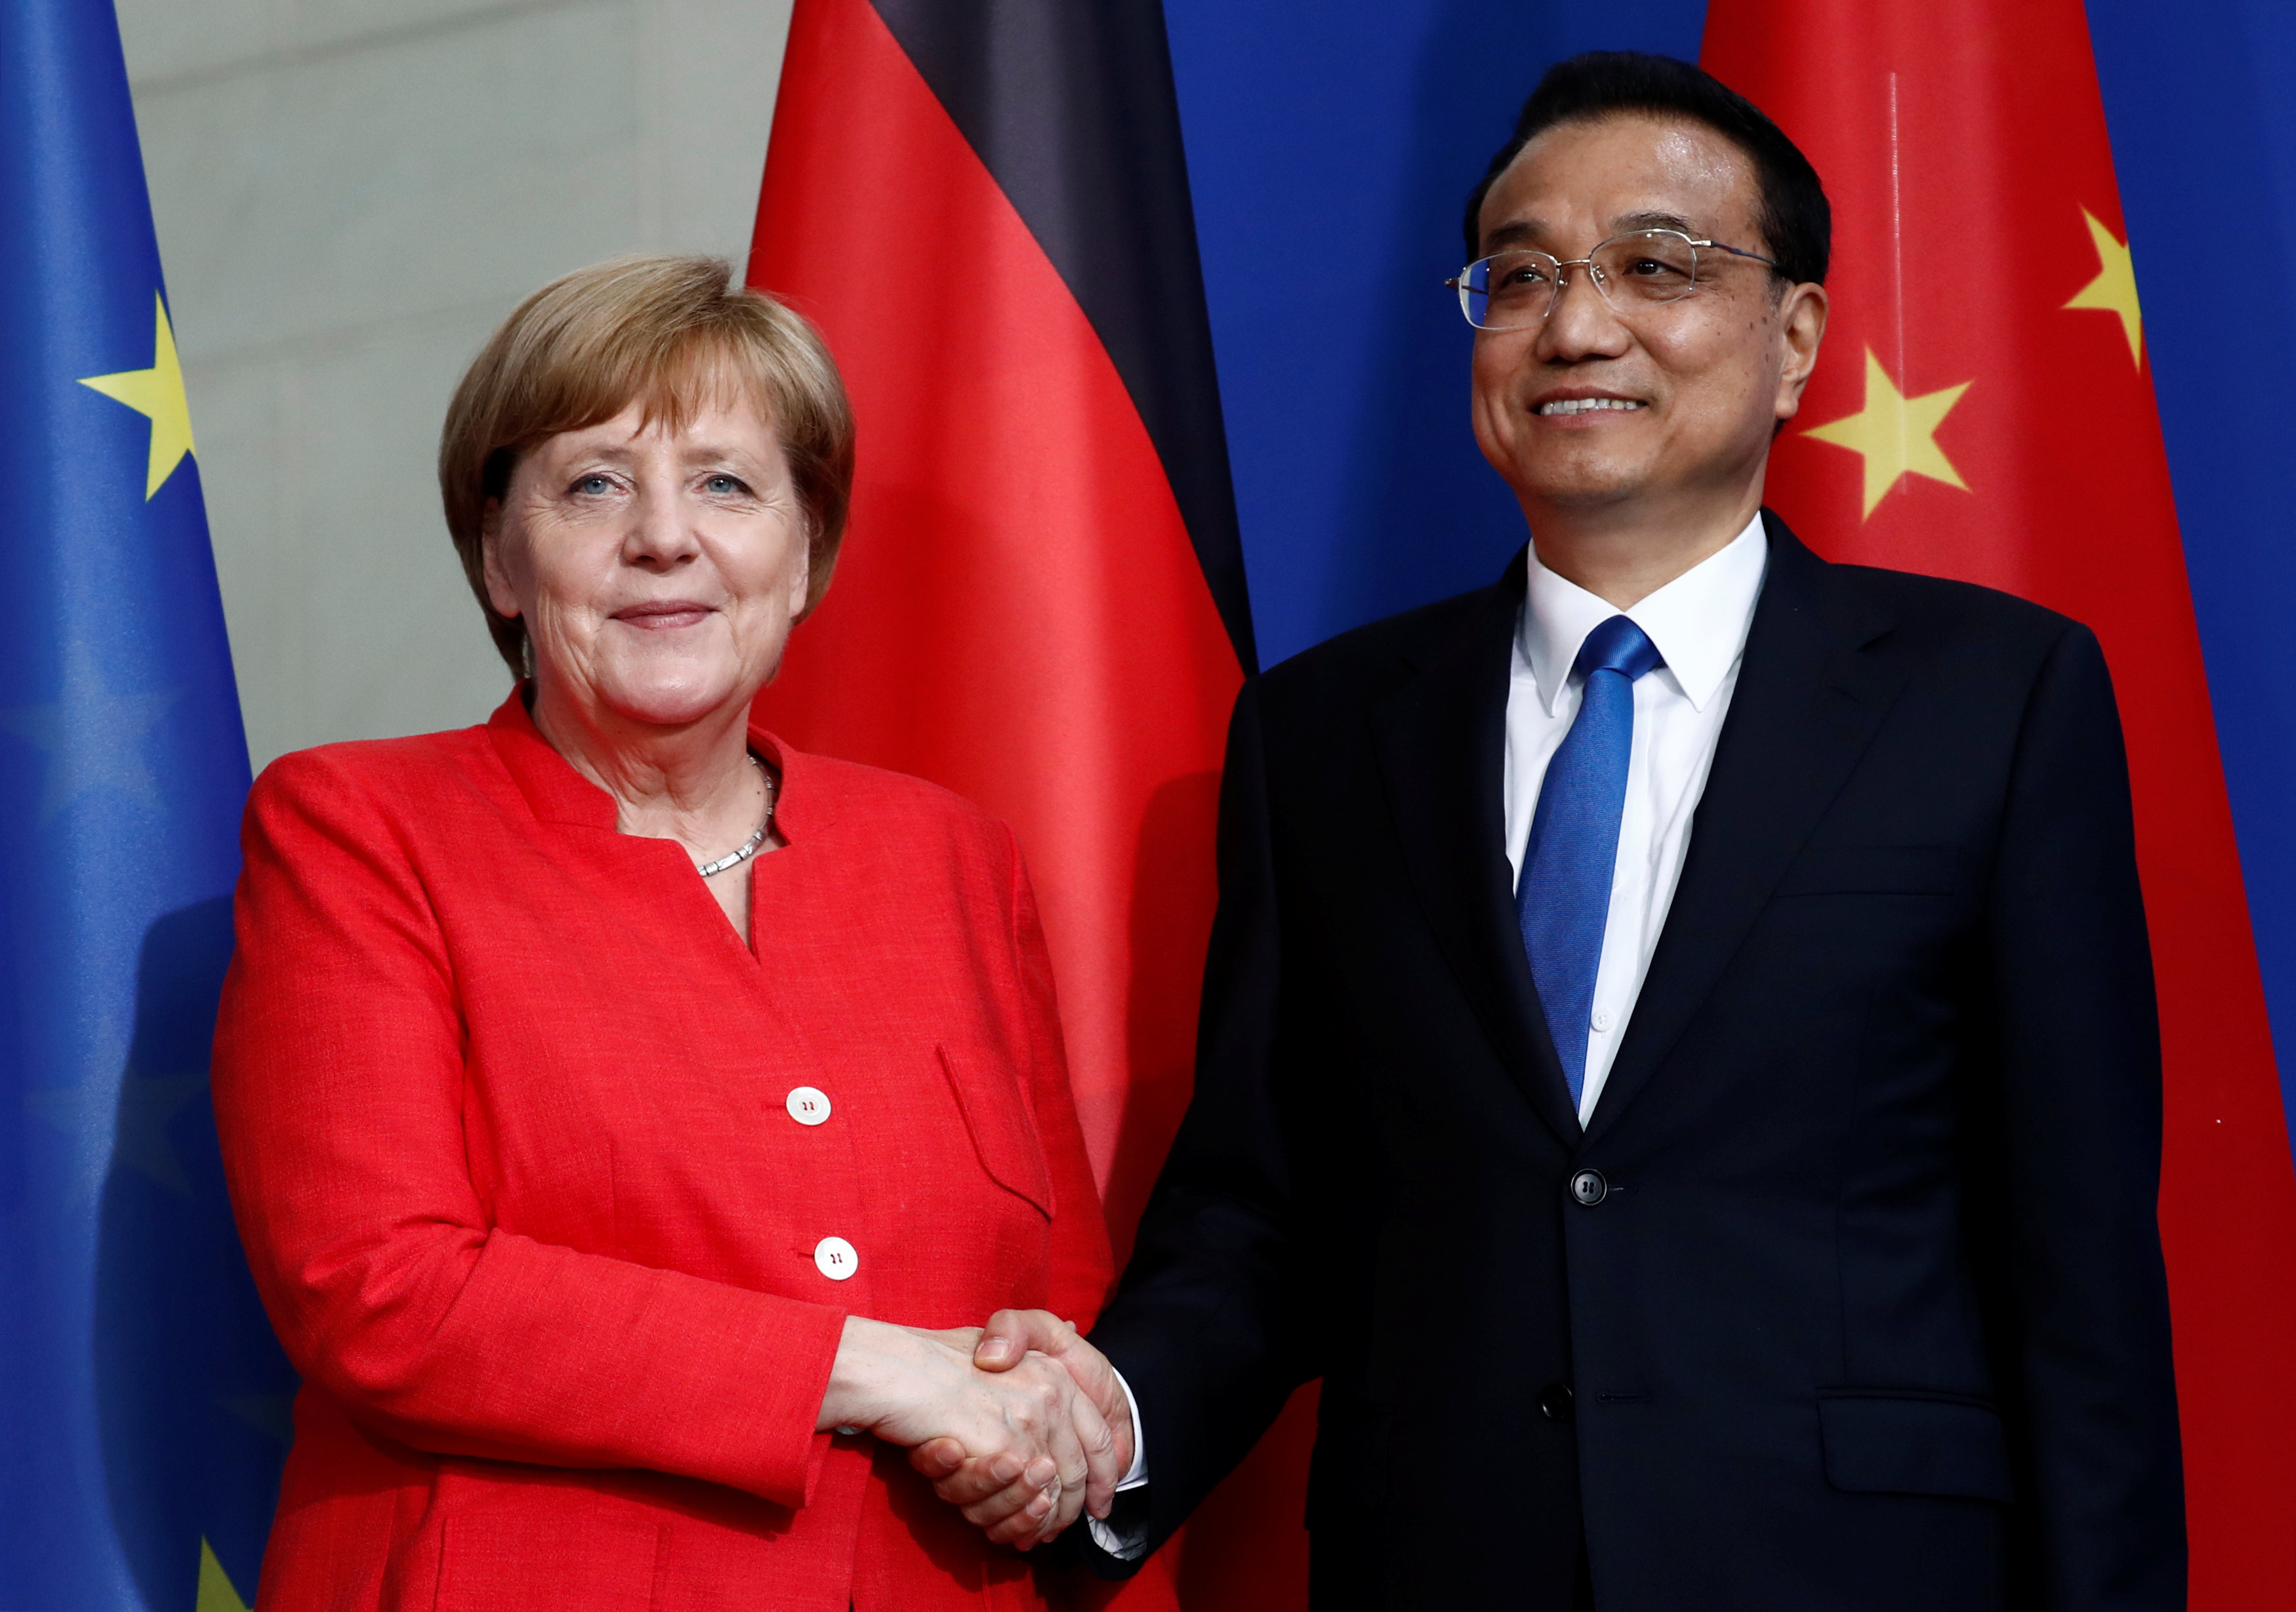 German Chancellor Angela Merkel and Chinese Prime Minister Li Keqiang shake hands after a news conference at the chancellery in Berlin